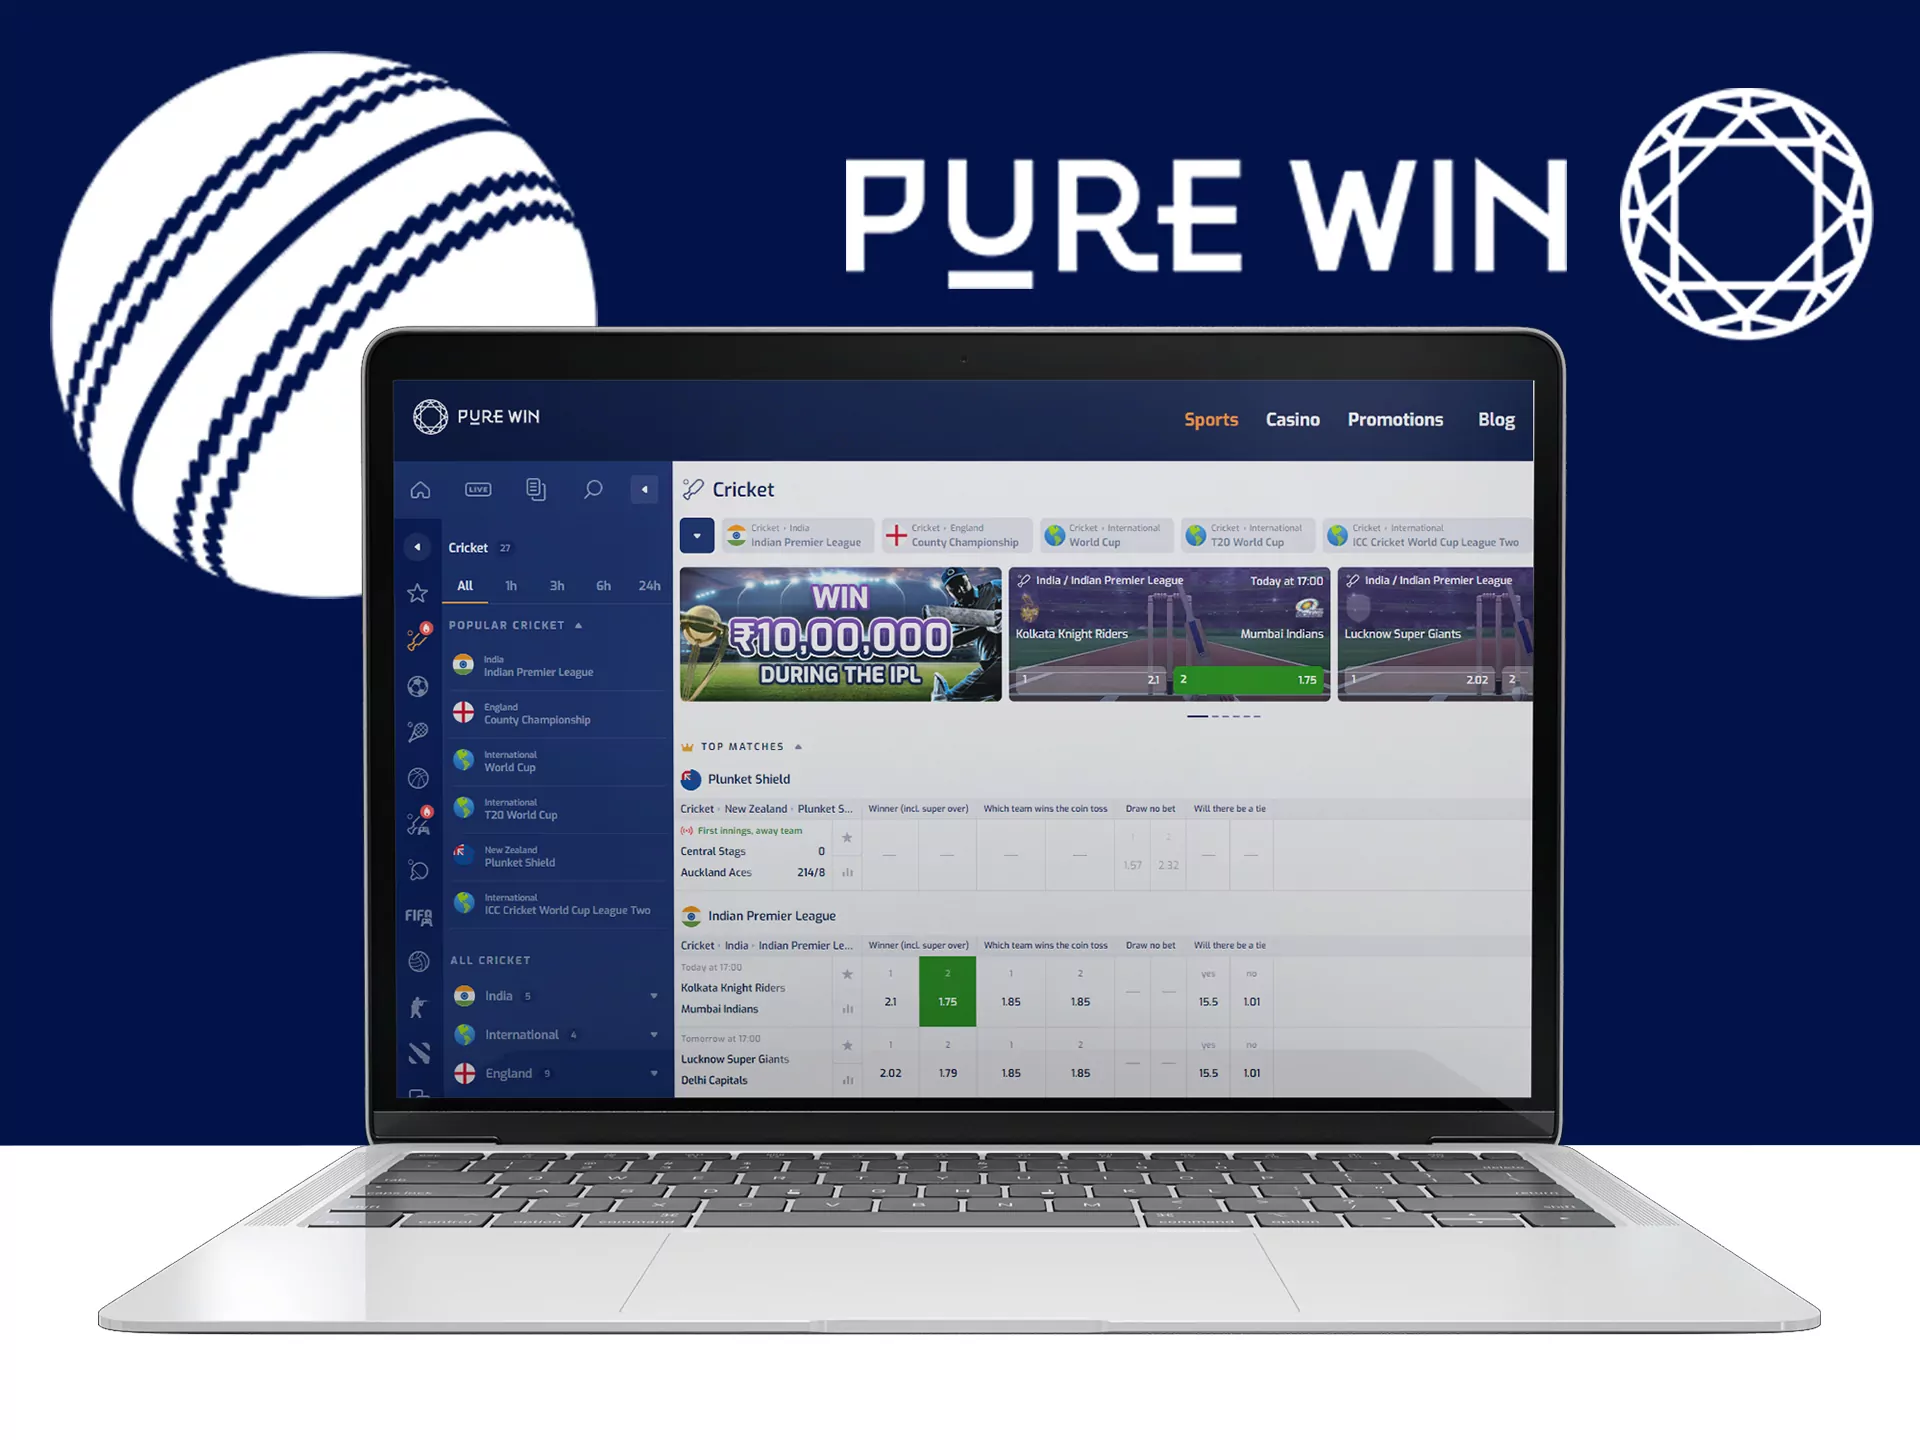 Bet on cricket matches at Pure Win.